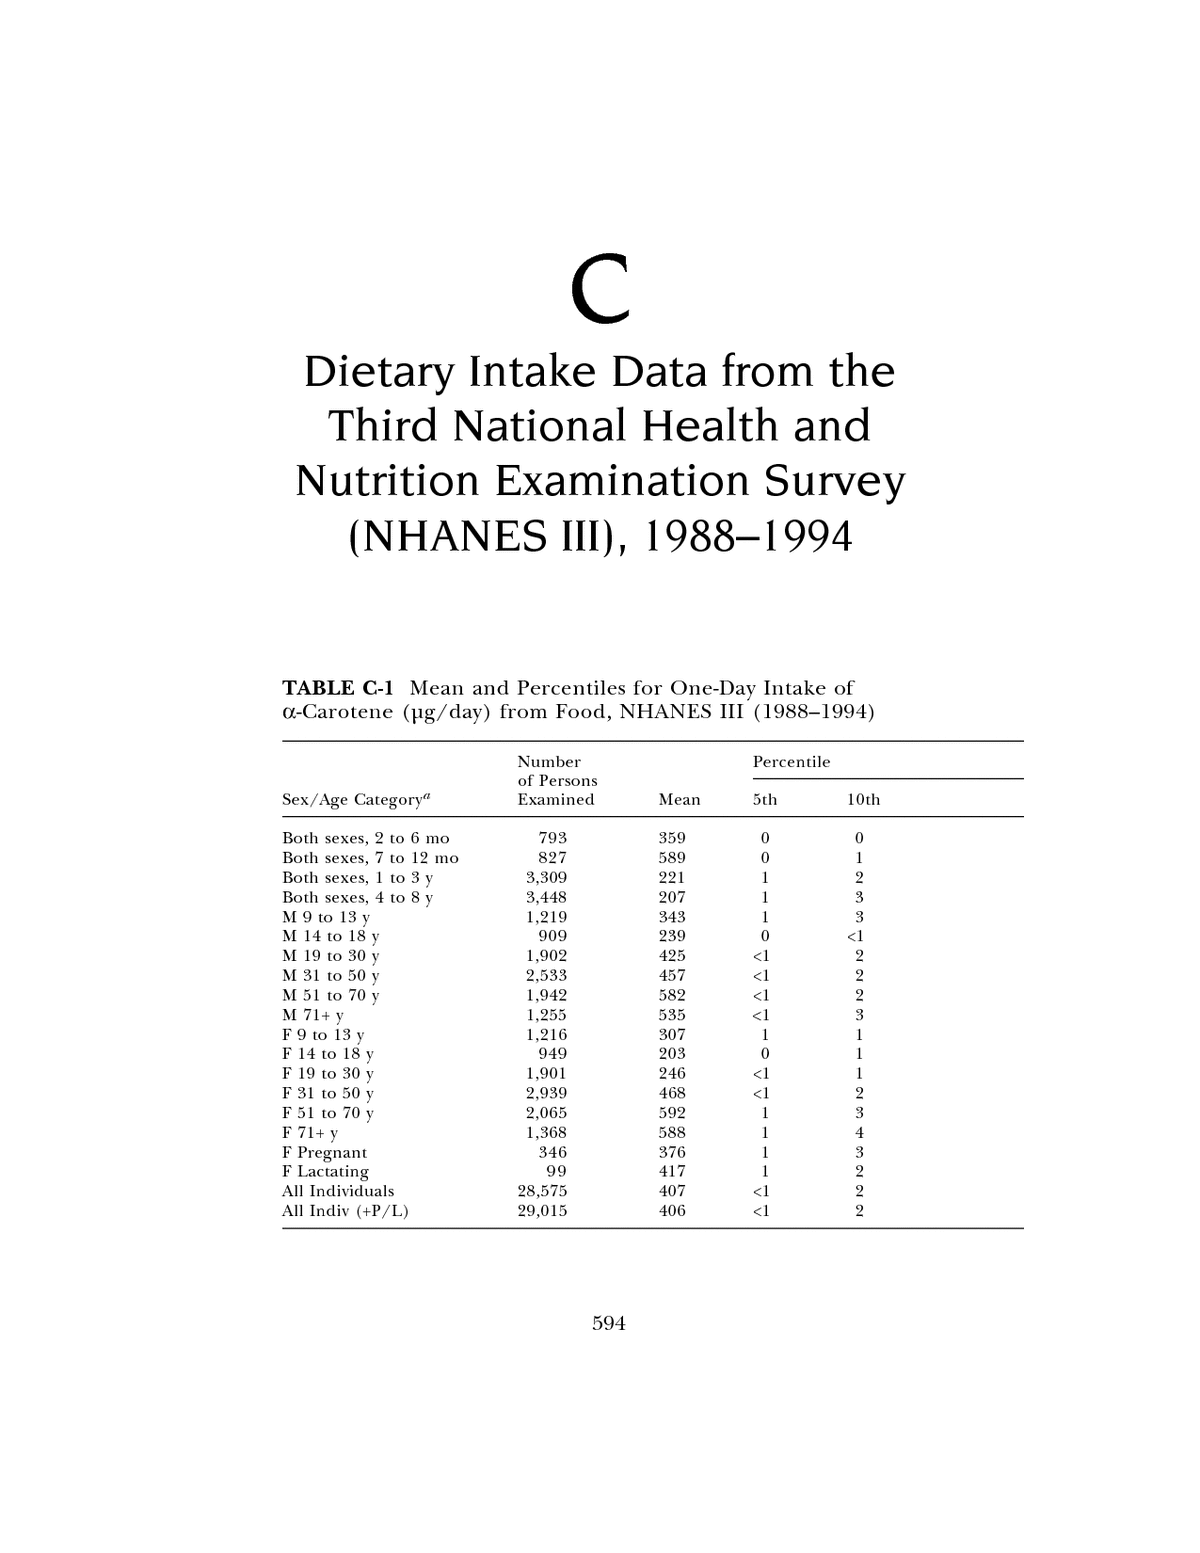 C Dietary Intake Data from the Third National Health and Nutrition